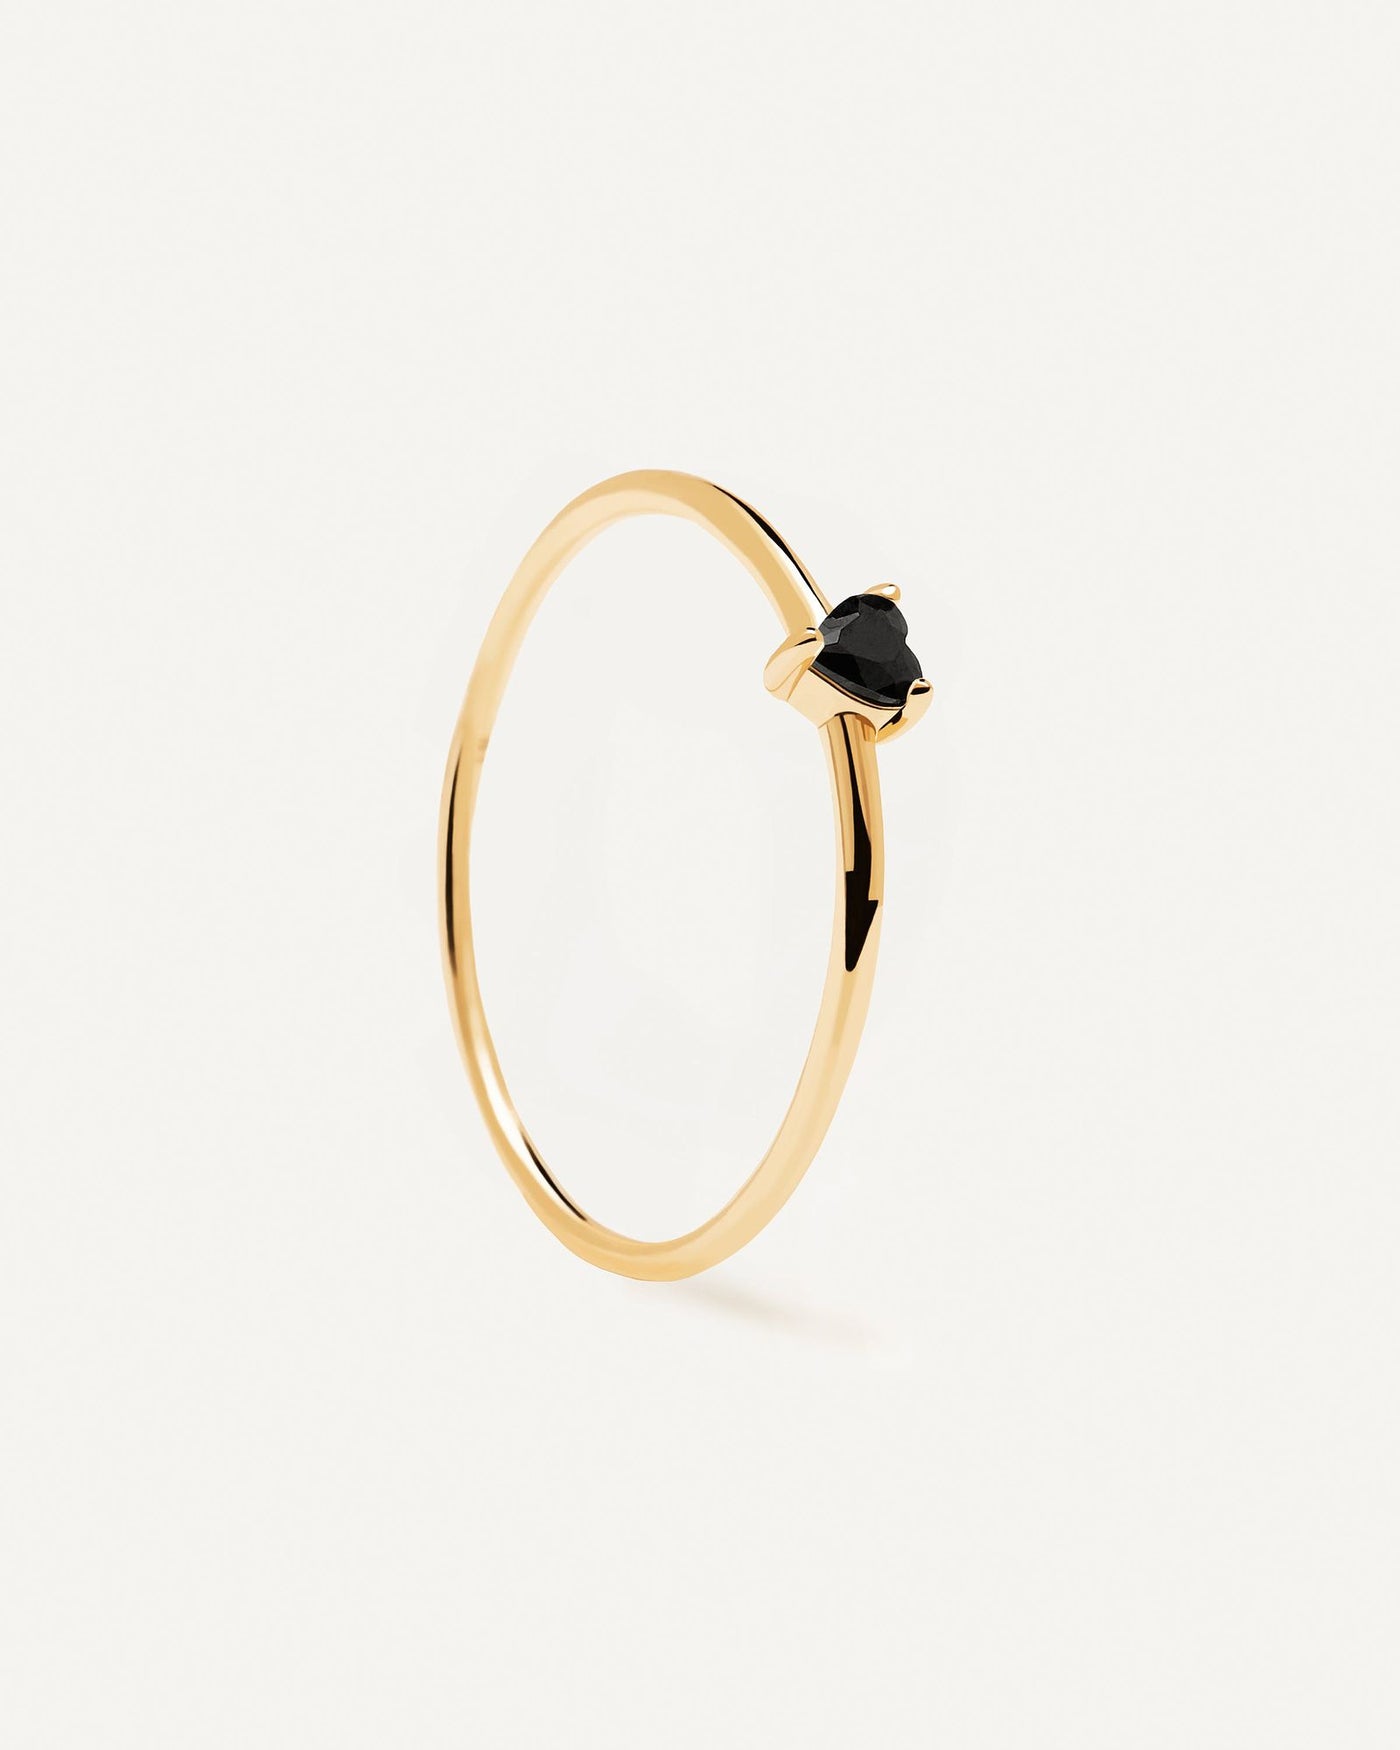 2024 Selection | Black Heart Ring. Heart-shaped black zirconia stone prong-set on a thin 18k gold plated ring. Get the latest arrival from PDPAOLA. Place your order safely and get this Best Seller. Free Shipping.